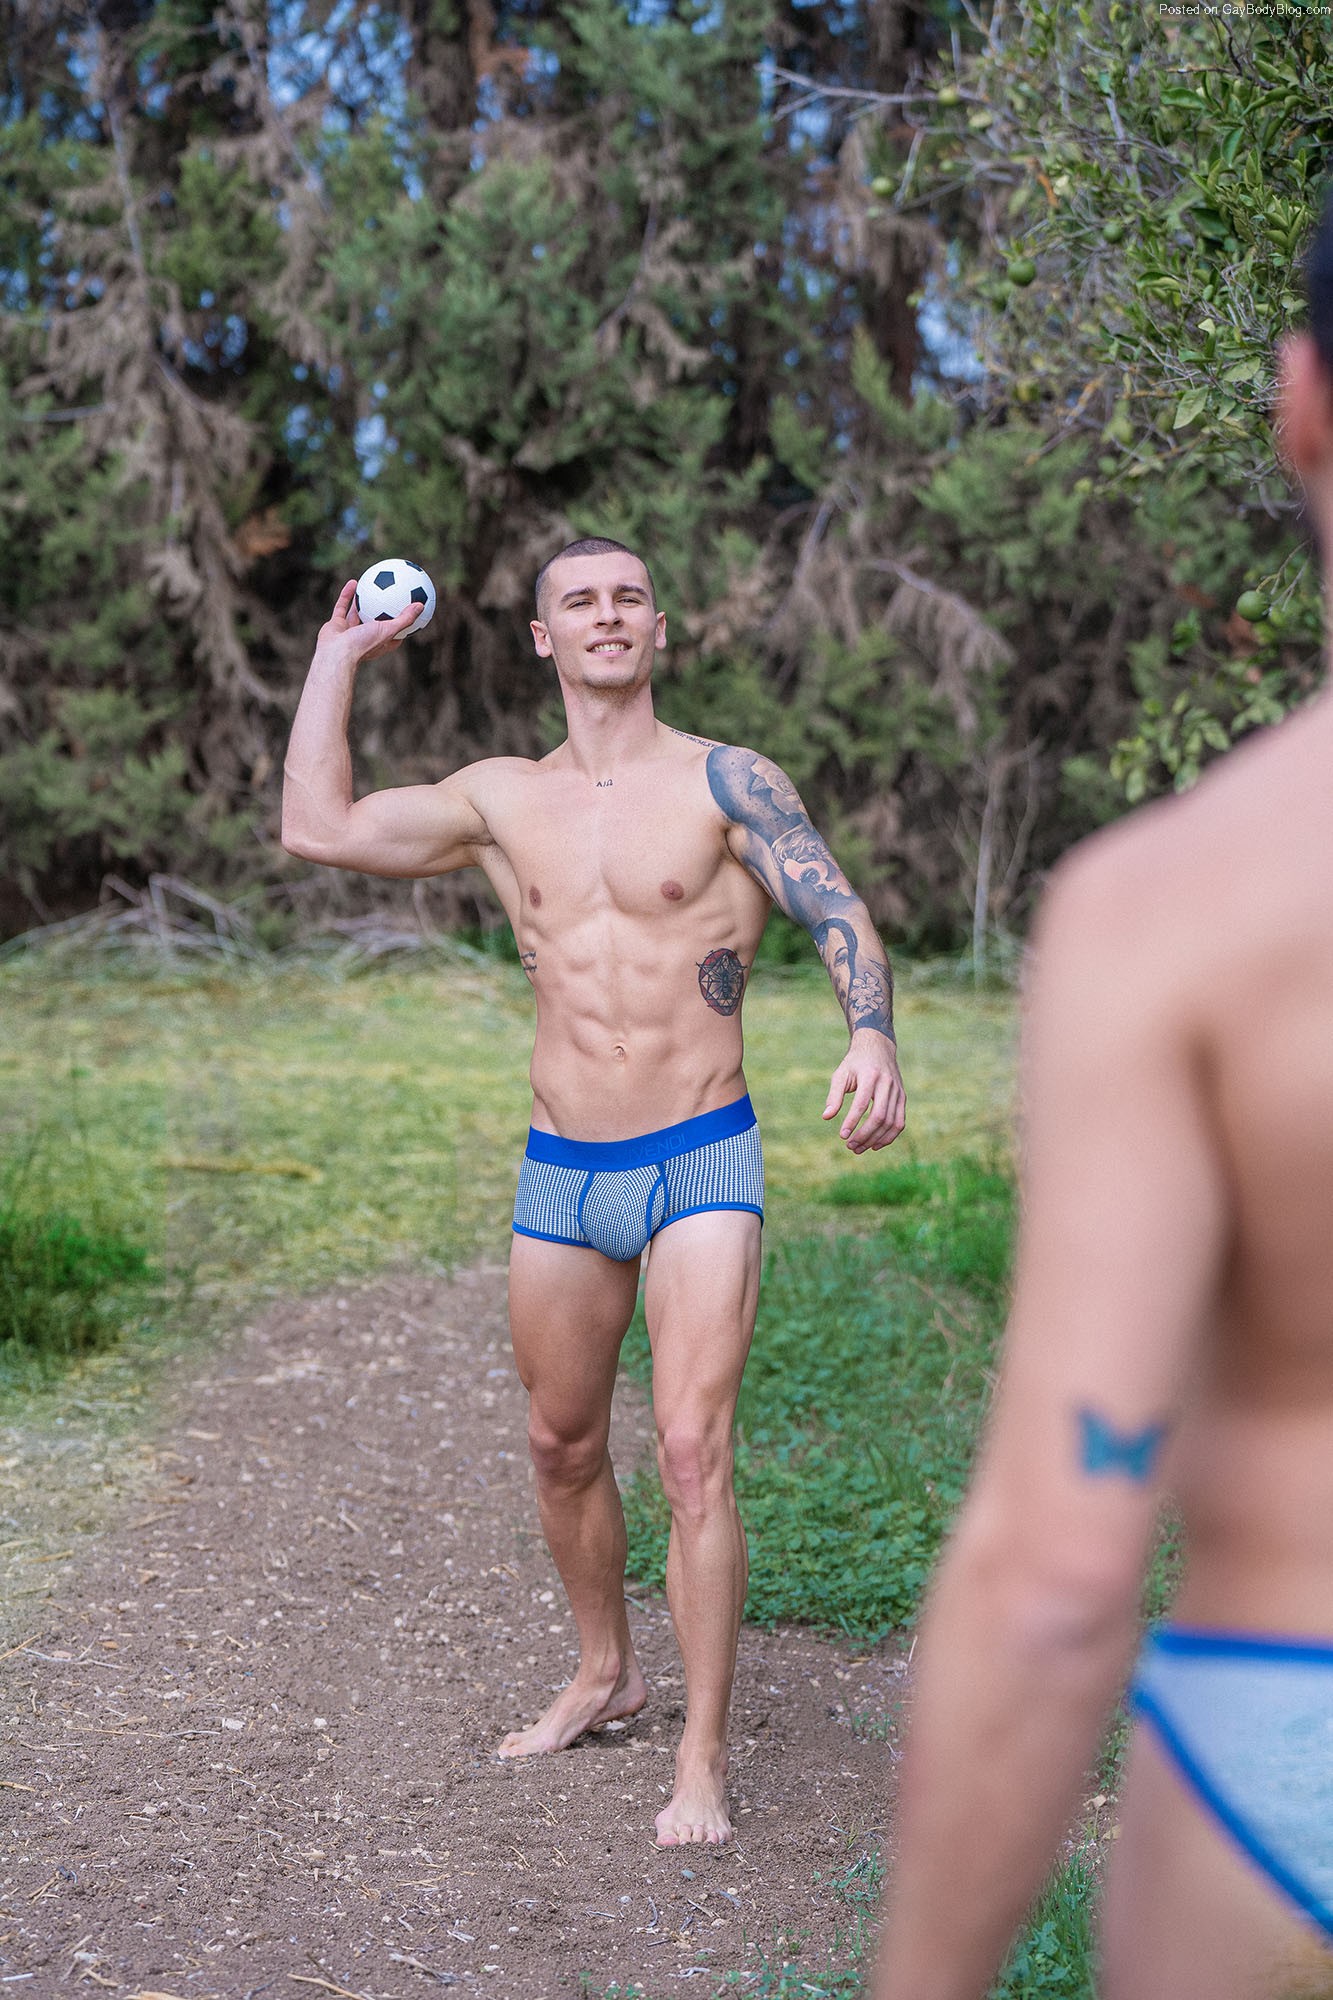 We’d All Love A Picnic With Nearly Naked Hunks! | Daily Dudes @ Dude Dump